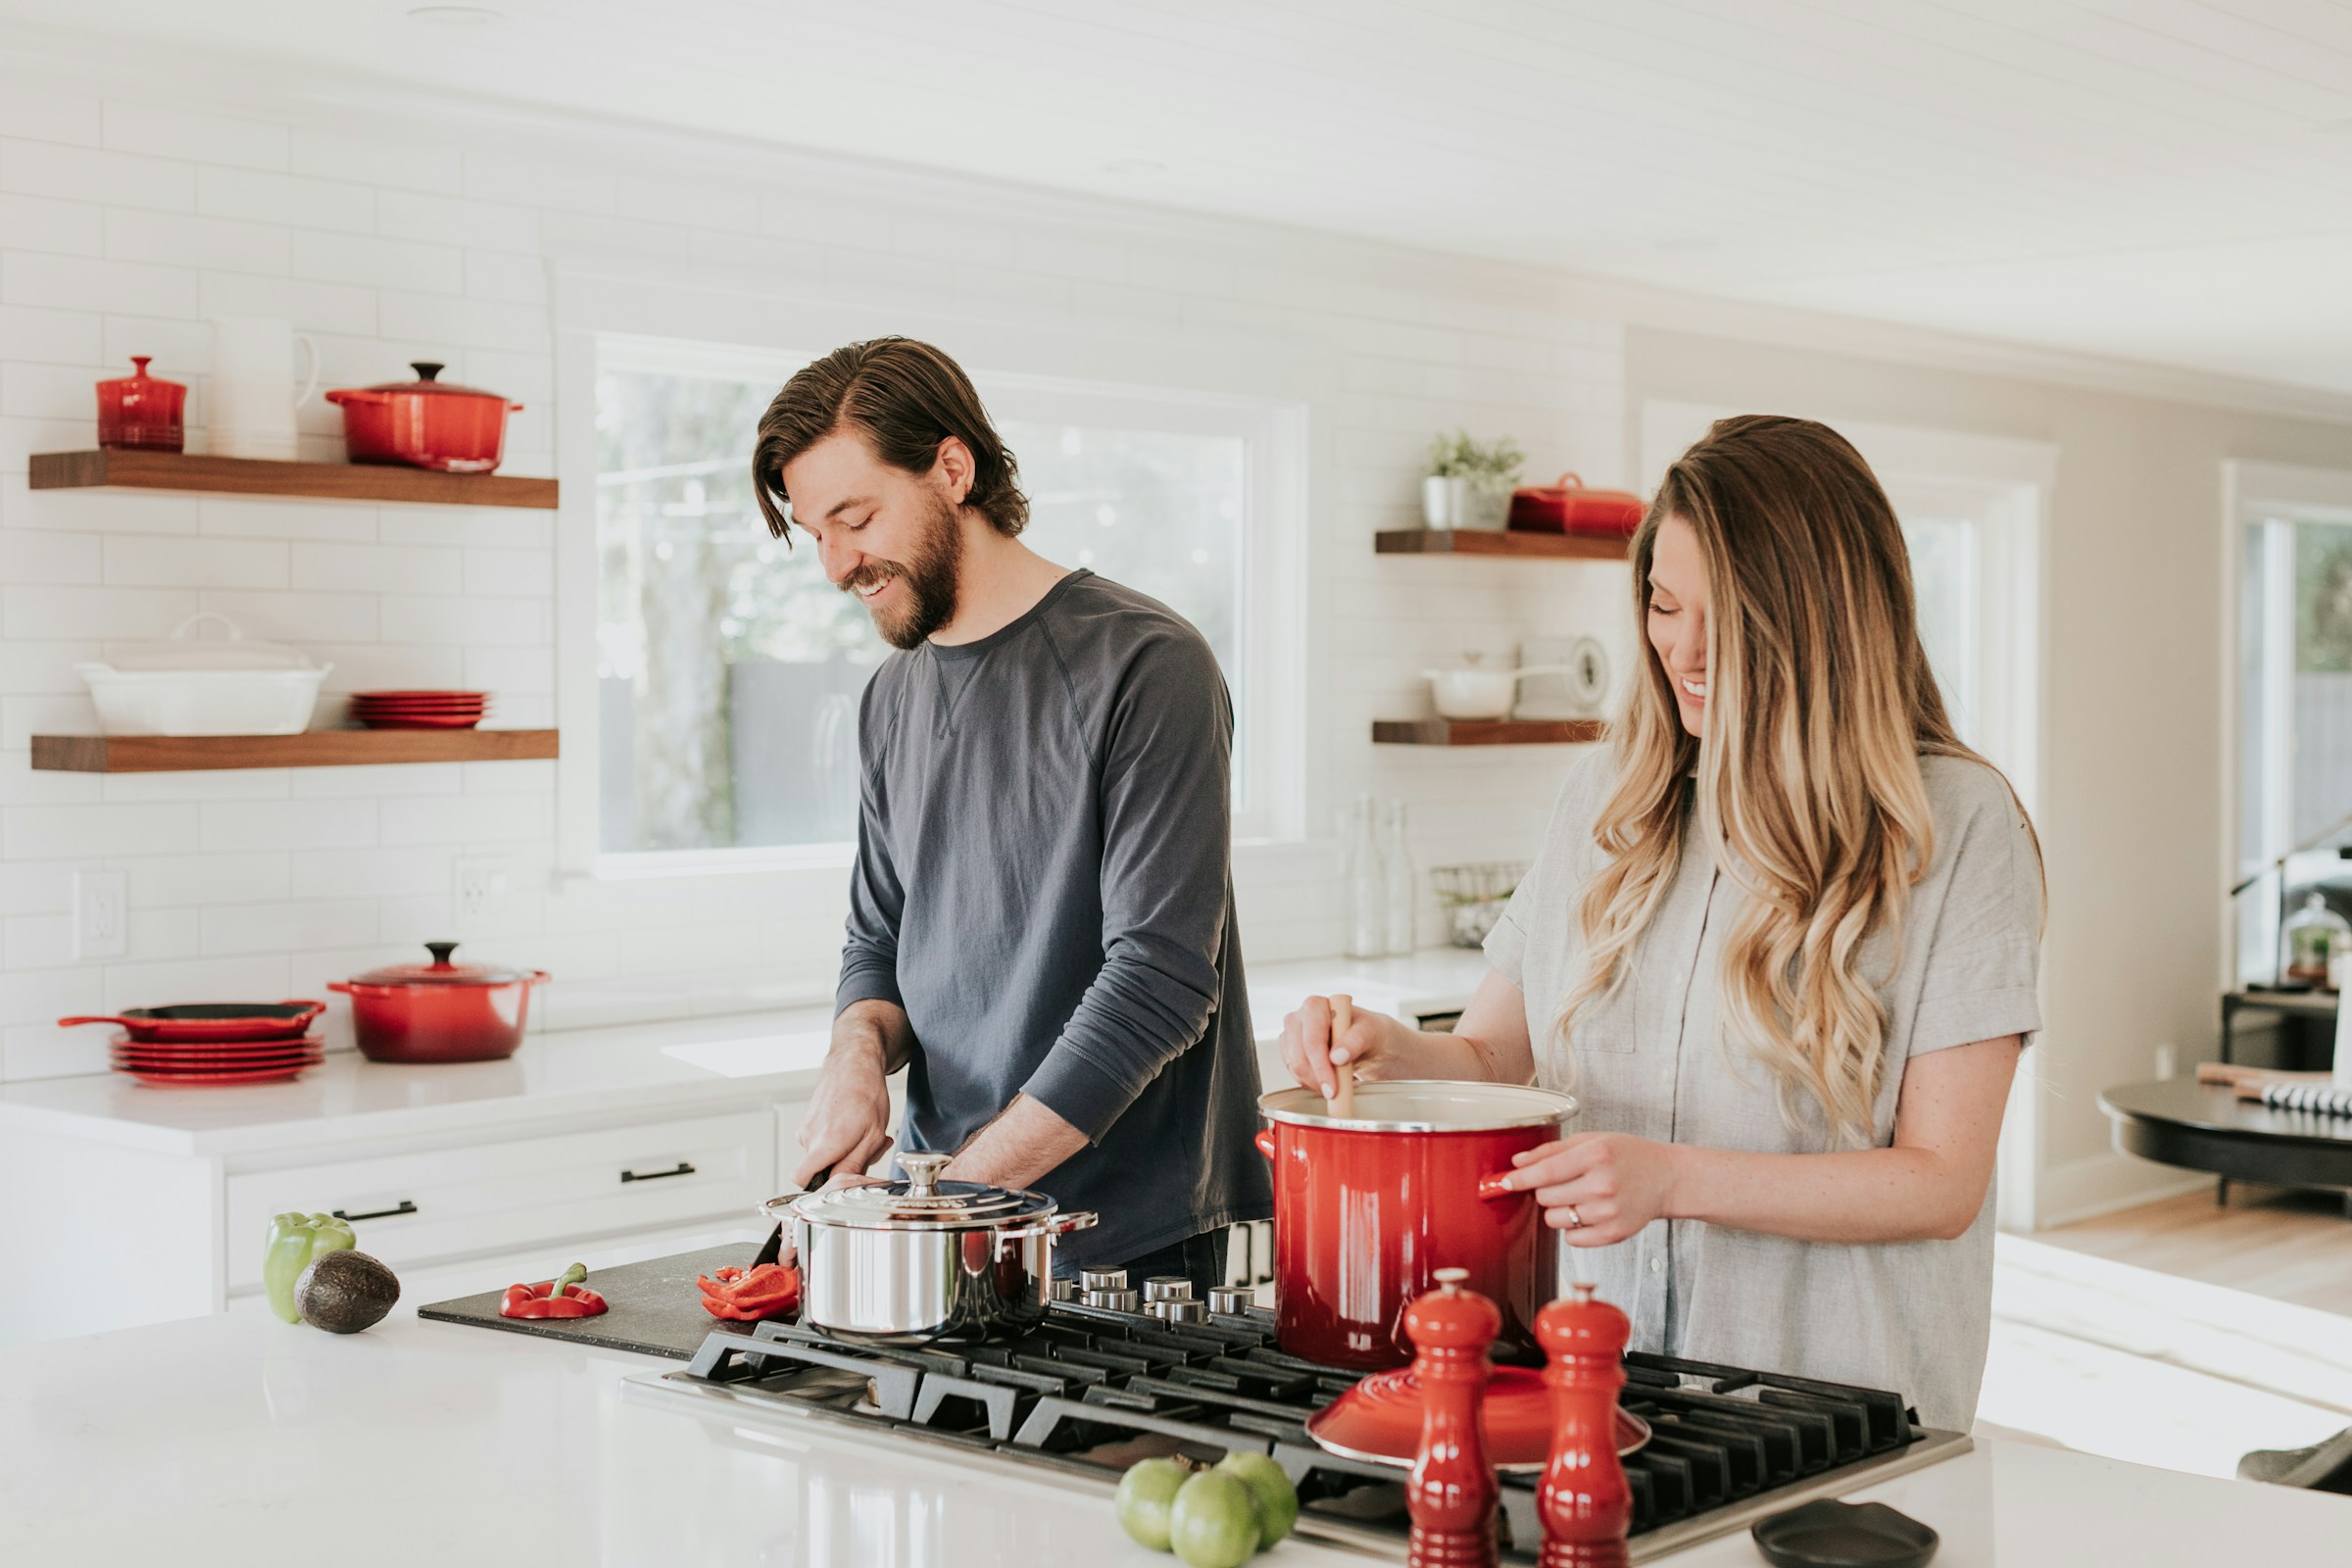 Happy couple cooking together | Source: Unsplash